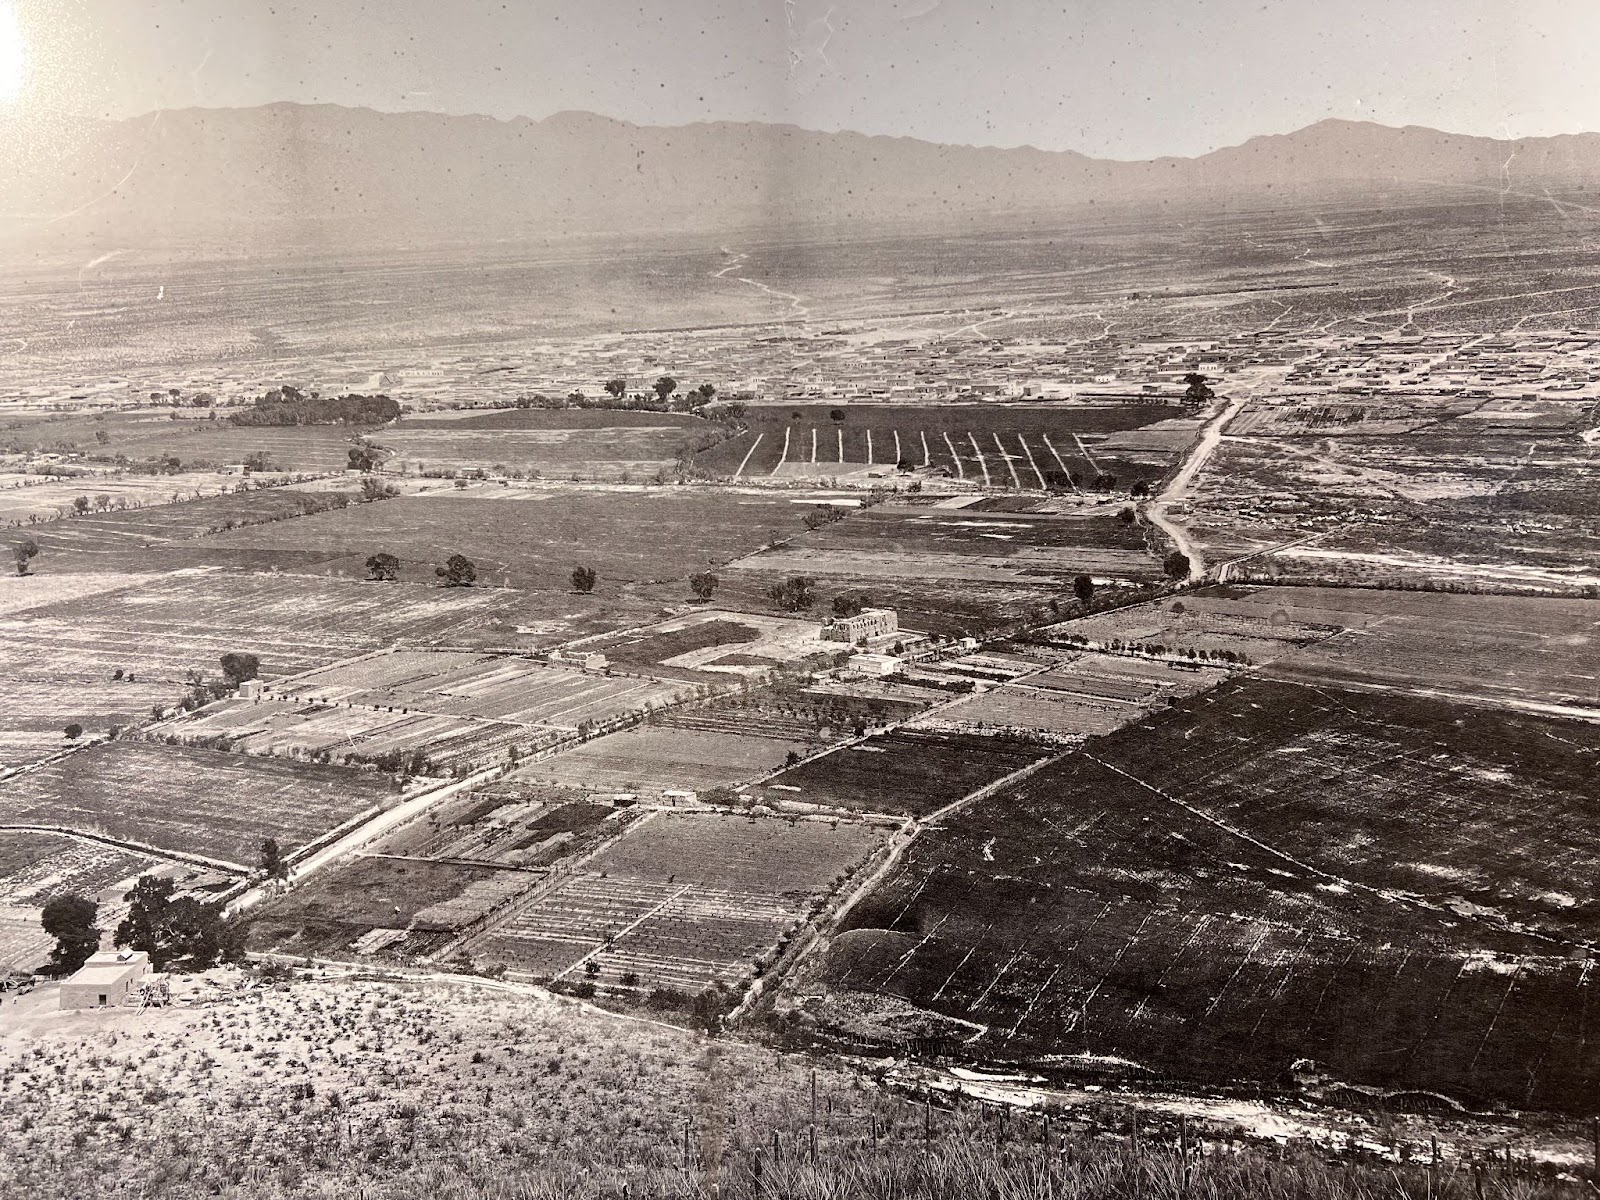 Black and white photo of a view from a mountain. The Santa Cruz runs in dozens of shallow canals below.